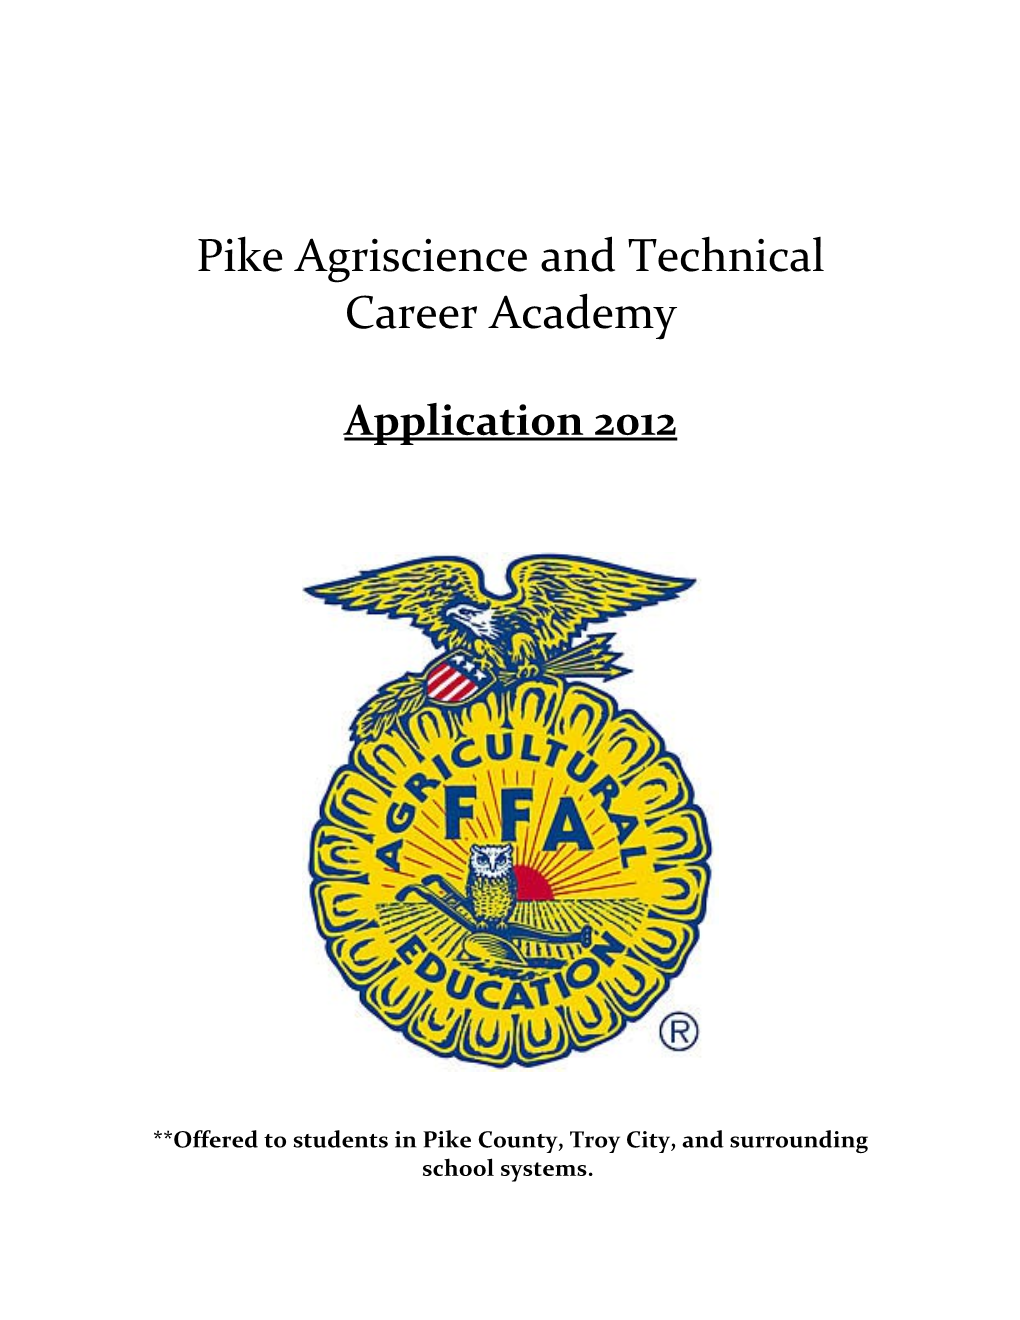 Pike Agriscience and Technical Career Academy